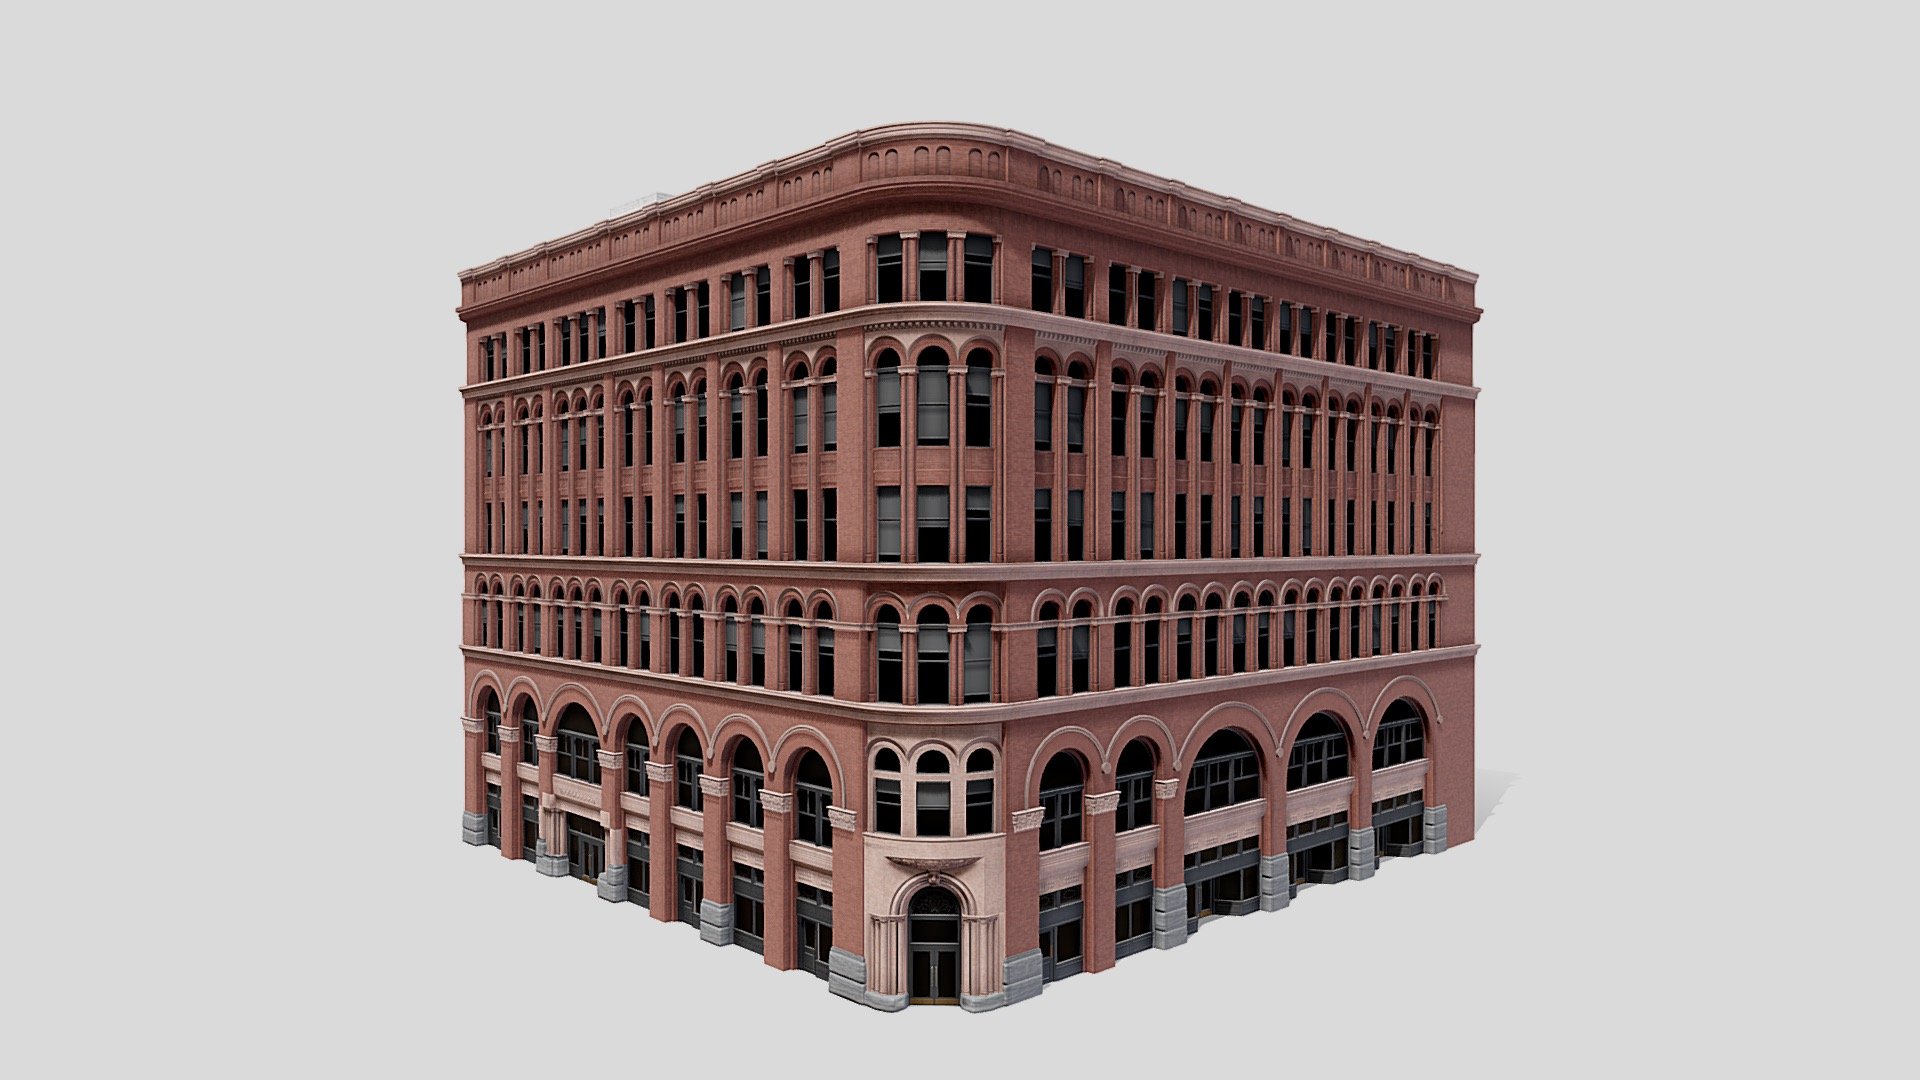 The Interurban Building, formerly known as the Seattle National Bank Building is an historic office building located in the Pioneer Square neighbourhood of Seattle, Washington, United States. Built from 1890 to 1891 for the newly formed Seattle National Bank, it is one of the finest examples of Richardsonian Romanesque architecture in the Pacific Northwest and has been cited by local architects as one of the most beautiful buildings in downtown Seattle. It was the breakthrough project of young architect John Parkinson, who would go on to design many notable buildings in the Los Angeles area in the late 19th and early 20th century 3d model